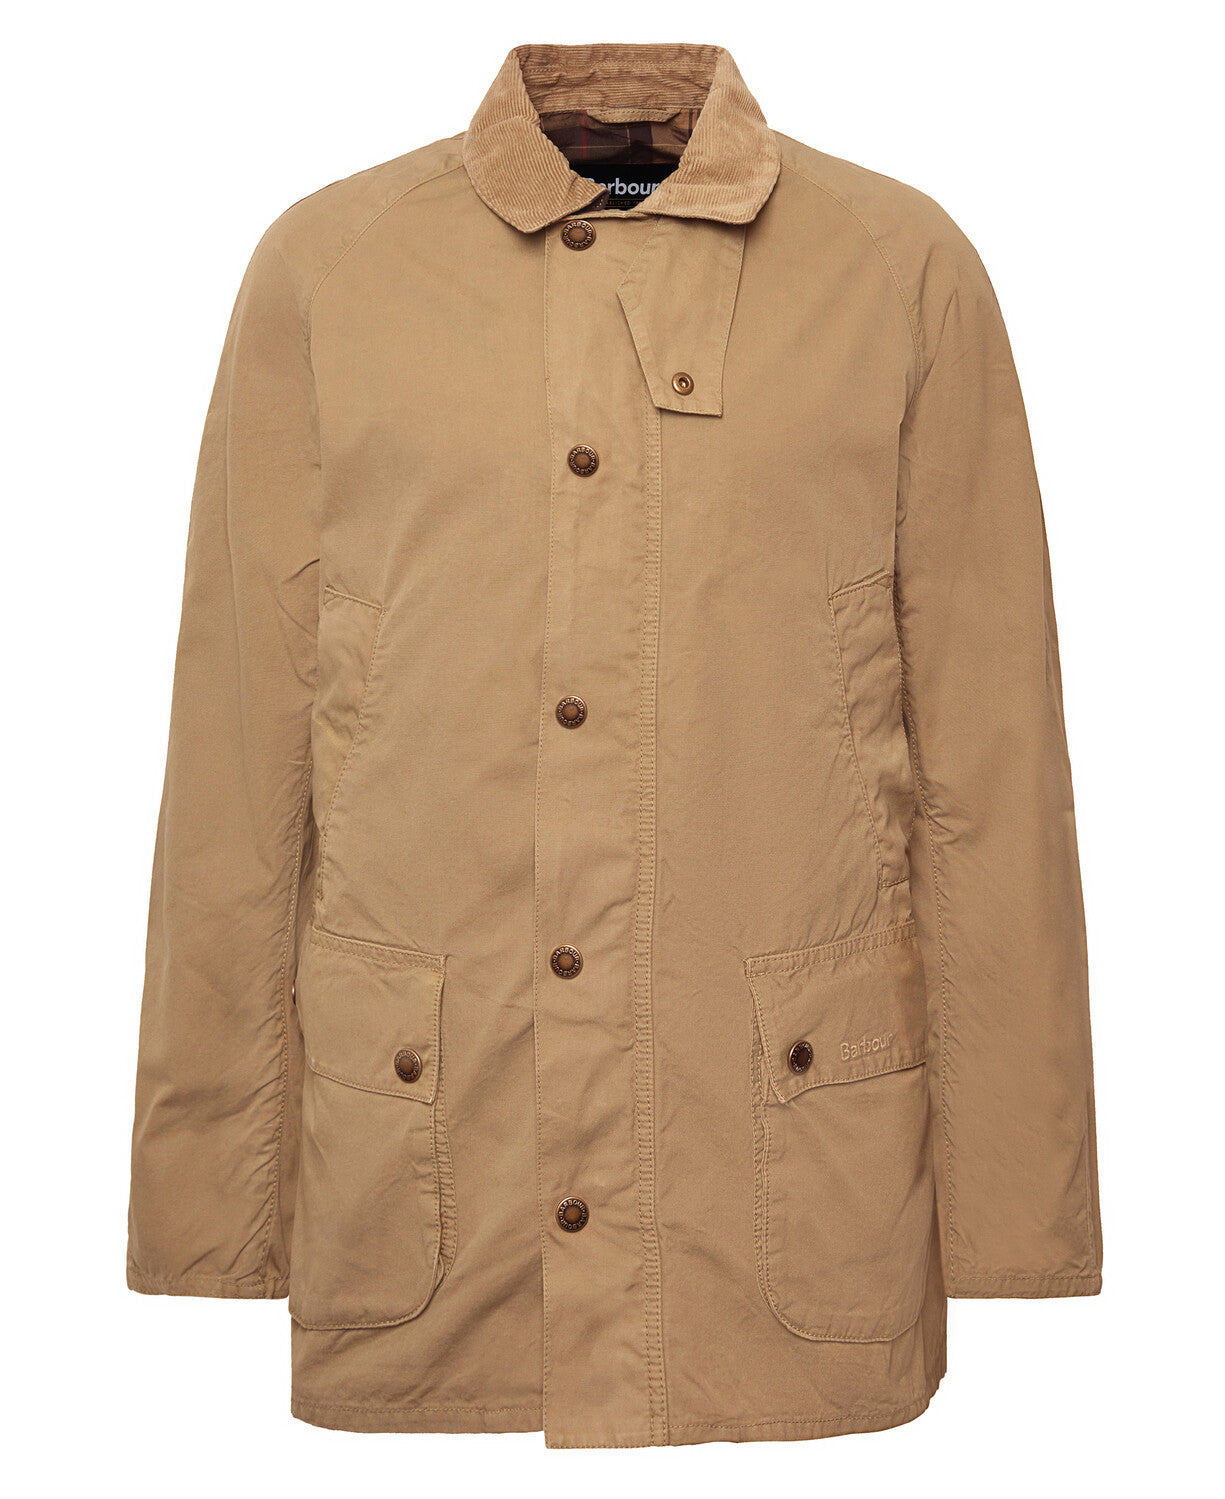 Barbour Ashby Casual Stone Jacket